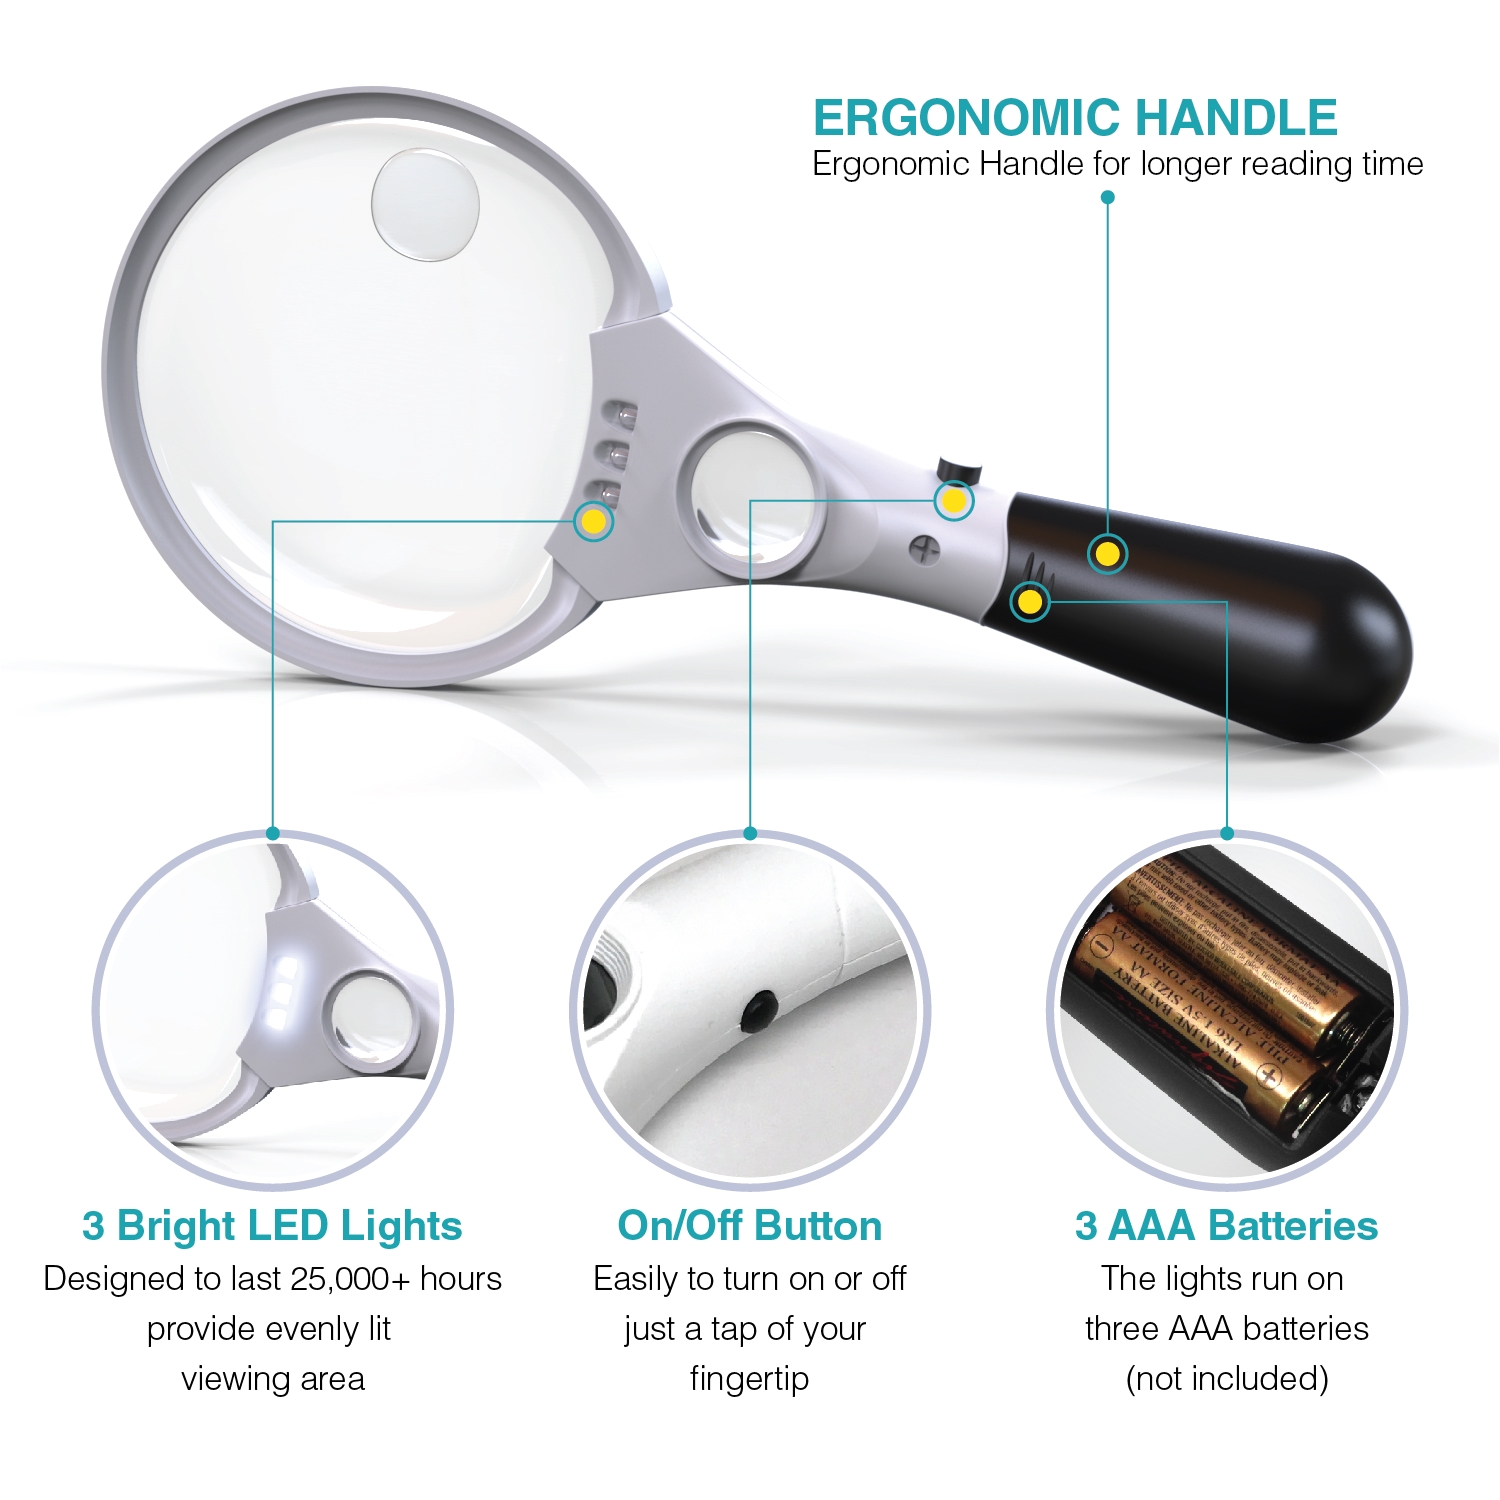 magnipros 3 ultra bright led lights 3x 4 5x 25x power handheld reading magnifying glass with light ideal for reading small prints map coins